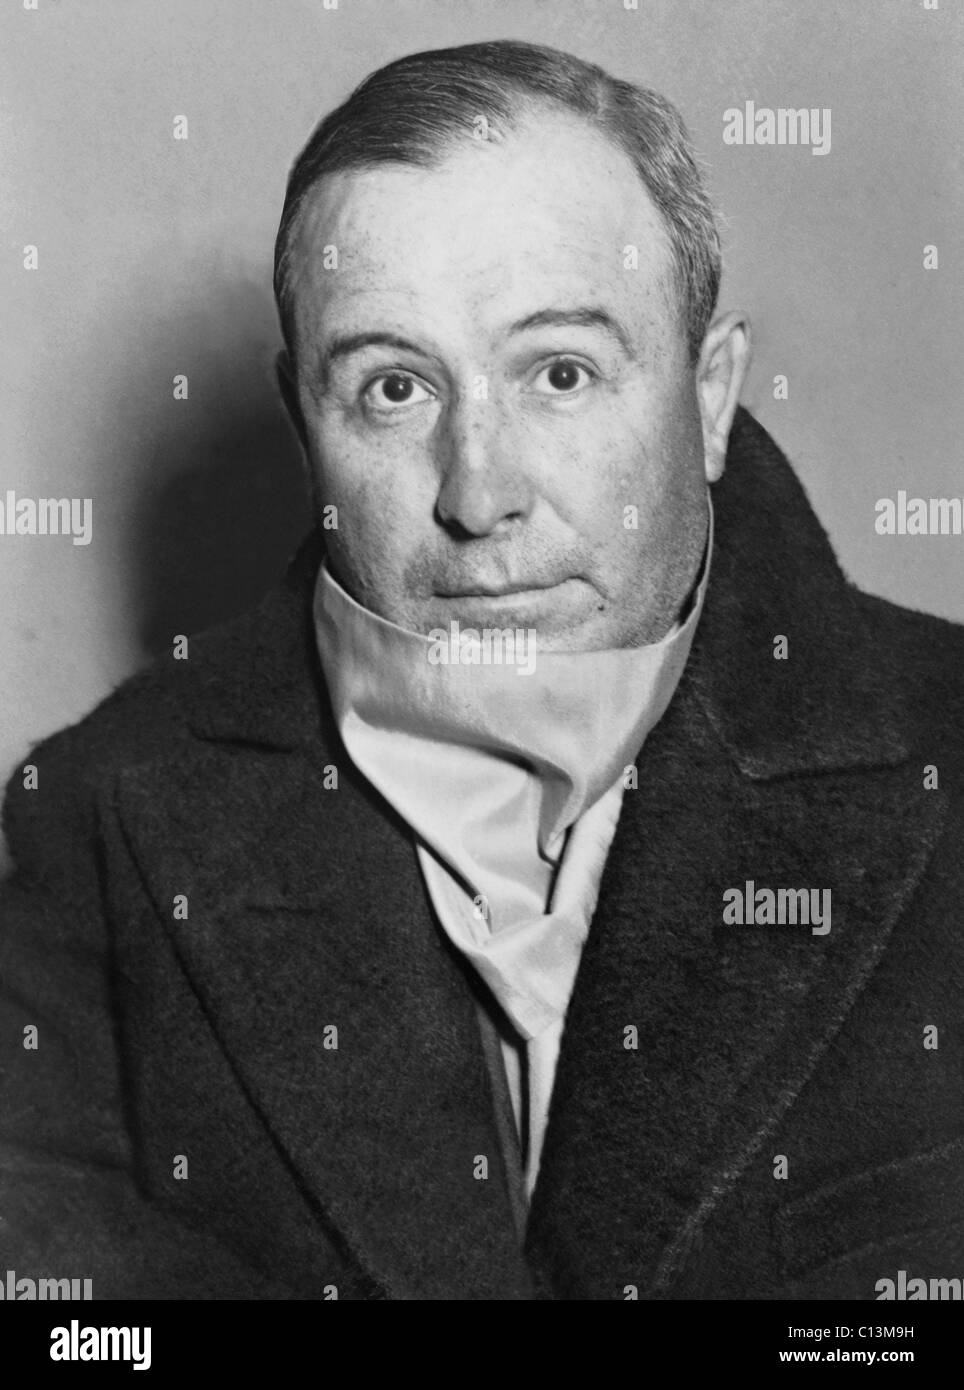 John Torrio 1882-1957 was head of the Chicago Outfit in the 1920s until he was nearly killed in a 1925 assassination attempt after which Al Capone took charge. Torrio returned to Chicago when Capone's leadership was impaired by government prosecutions Stock Photo